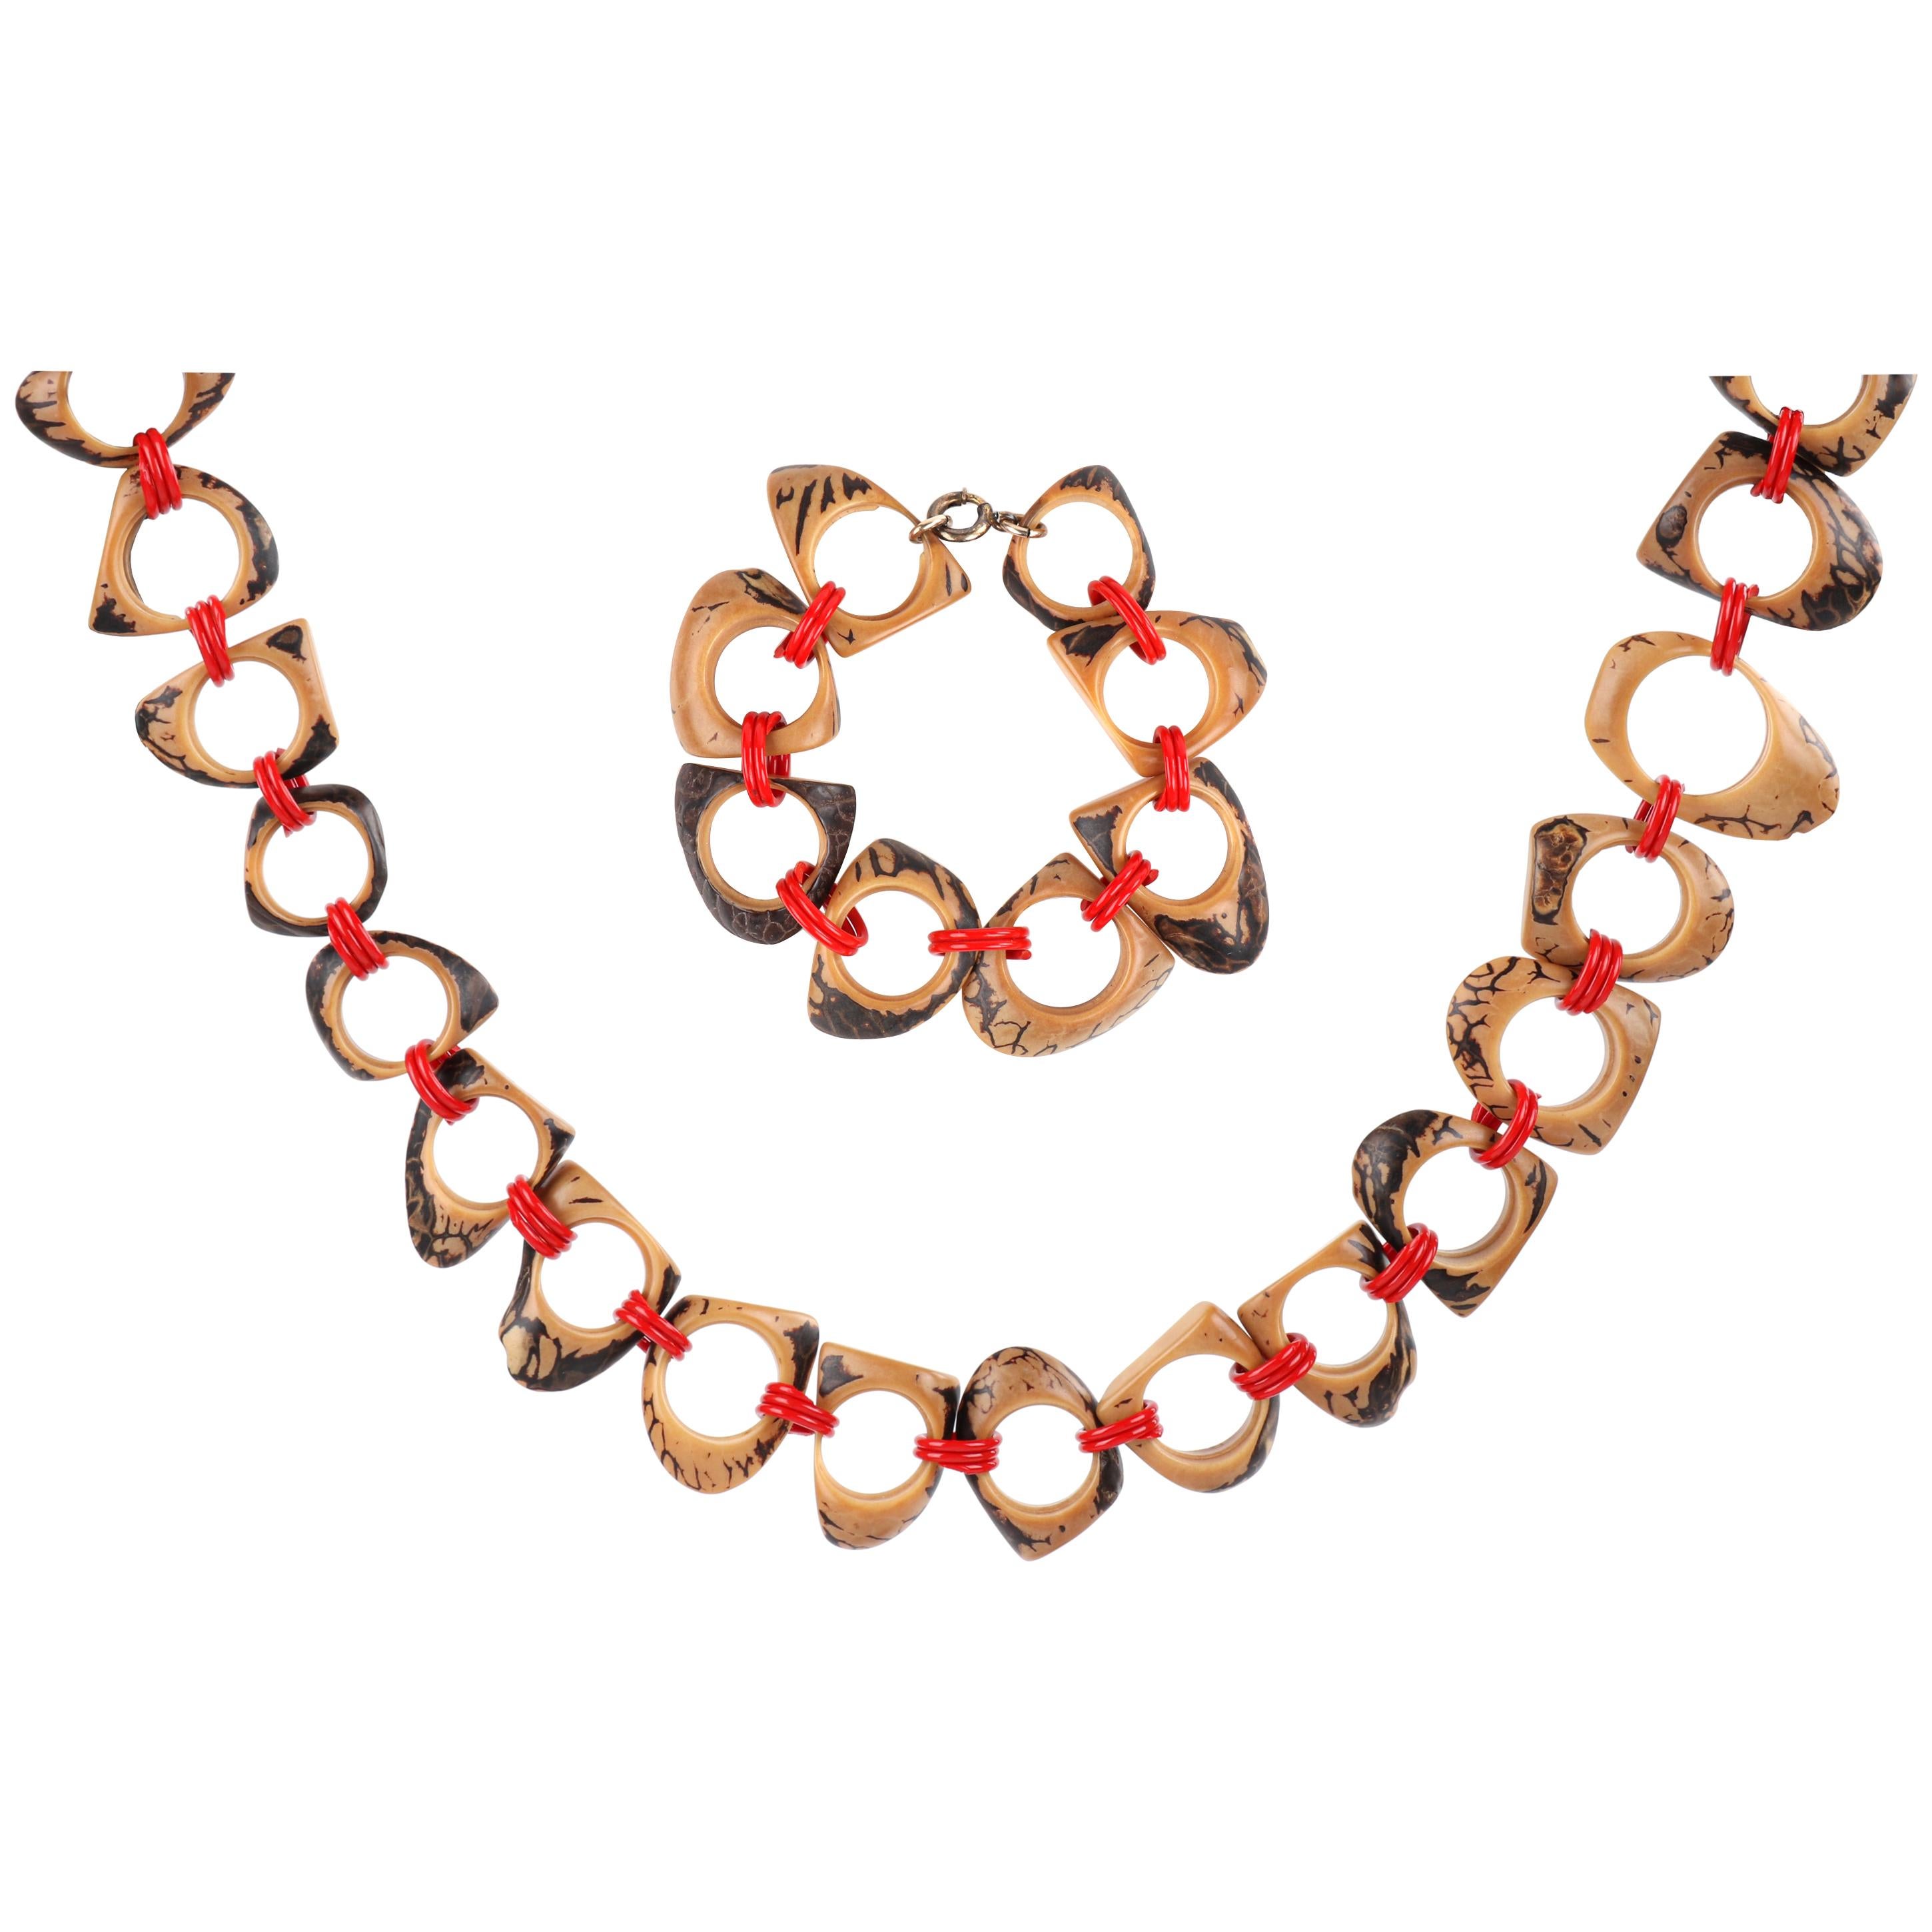 c.1940s-1950s Abstract Sculpted Carved Wood Plastic Chain Necklace Bracelet Set For Sale